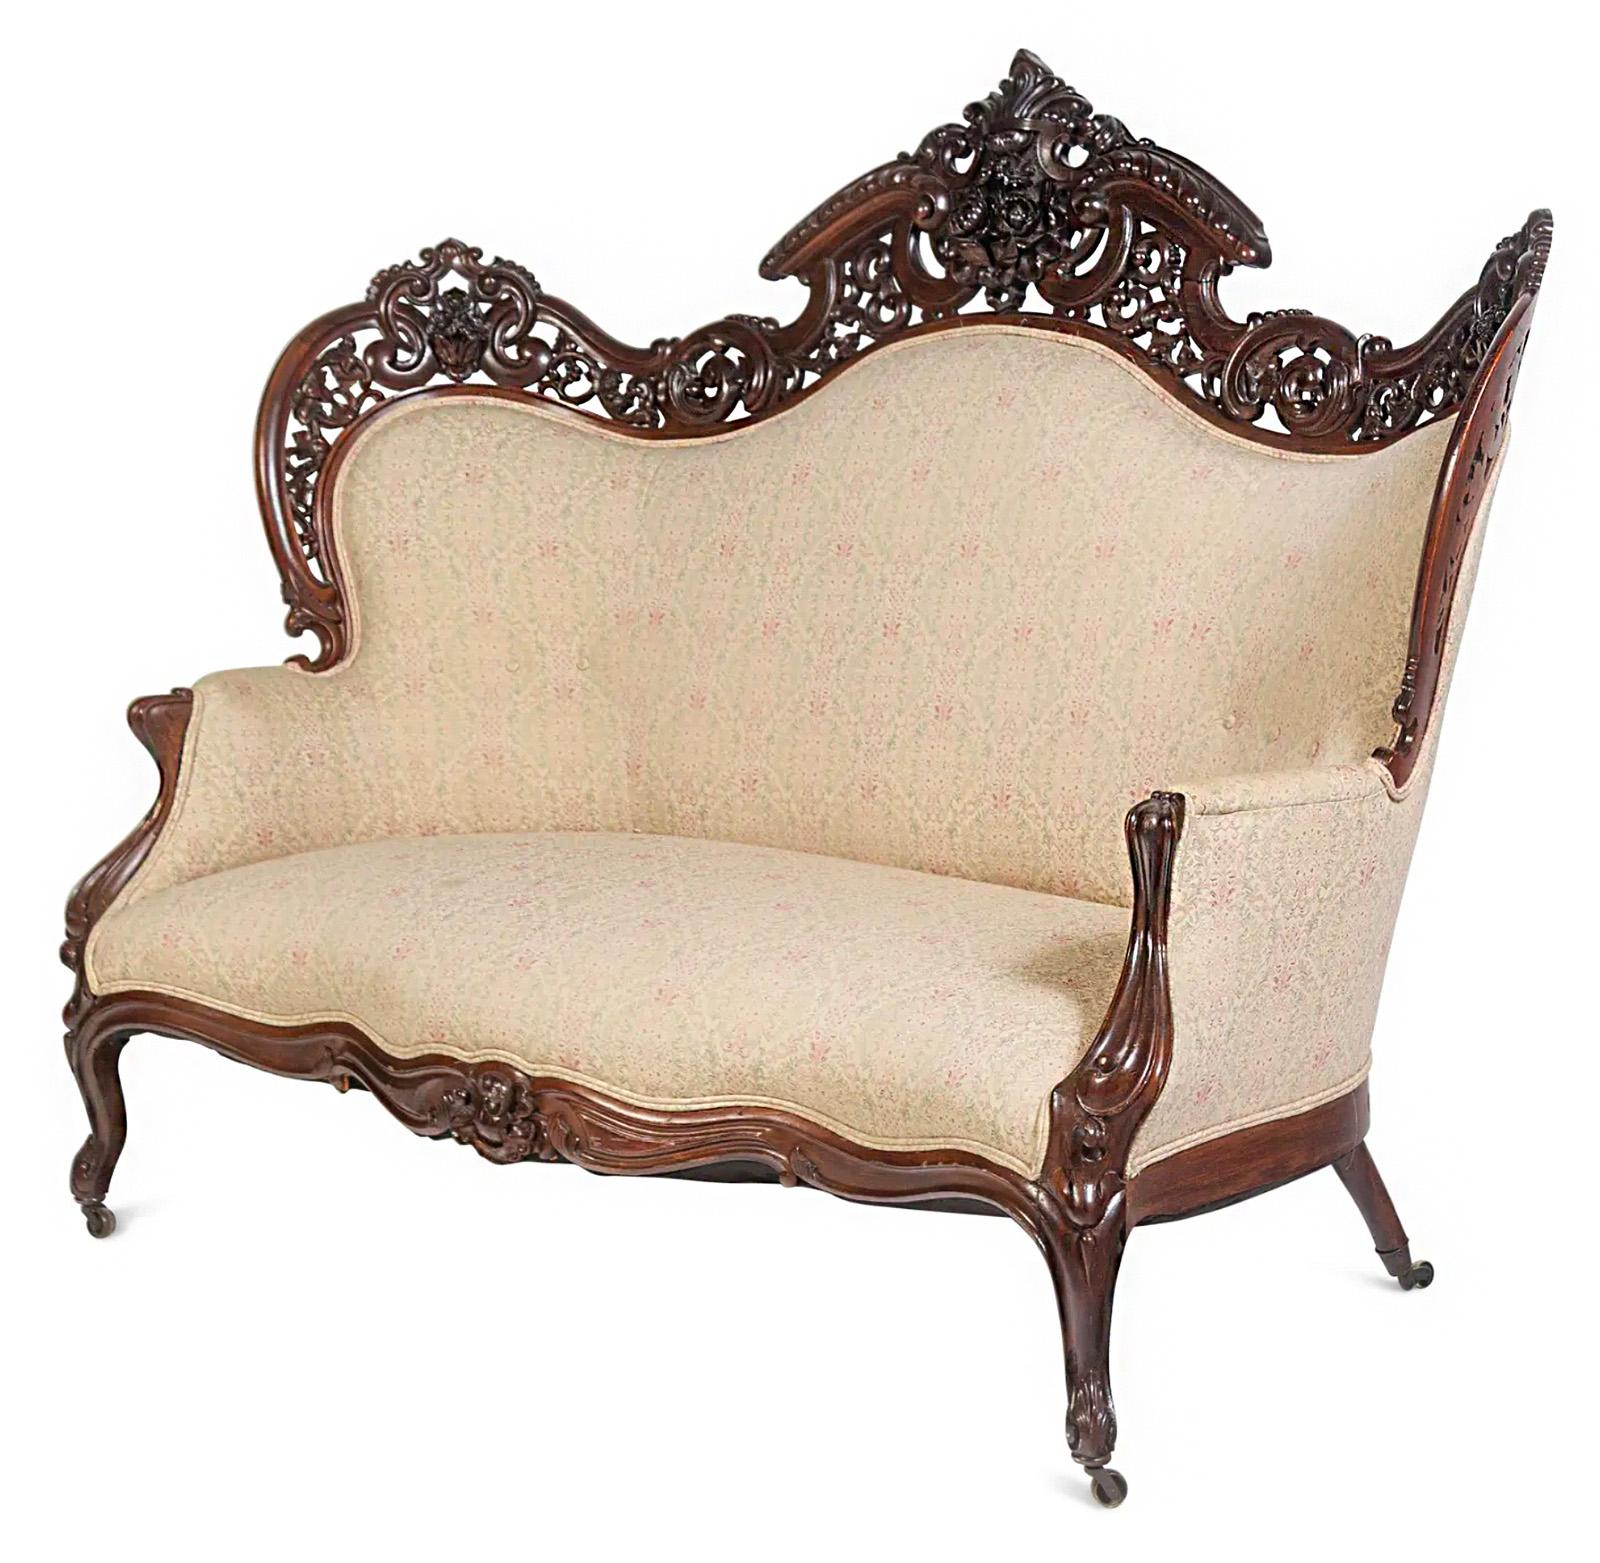 A carved rosewood sofa made by Joseph Meeks and Sons circa 1860.

Dimensions: 50.5